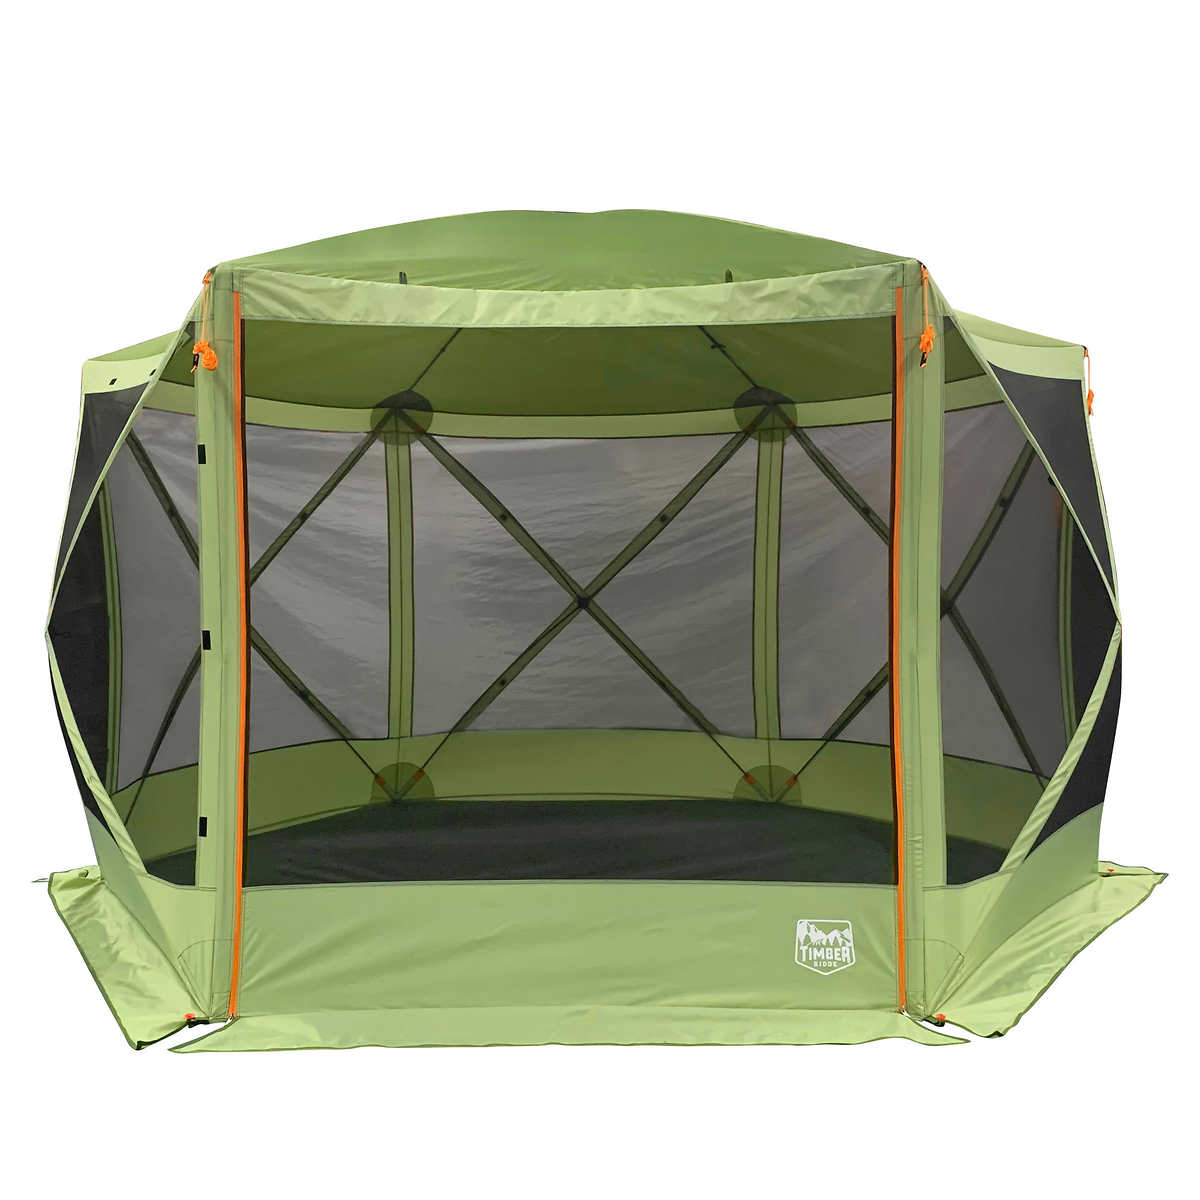 Costco is Selling a Pack N Go Gazebo That Will Protect You From All Those  Summer Critters